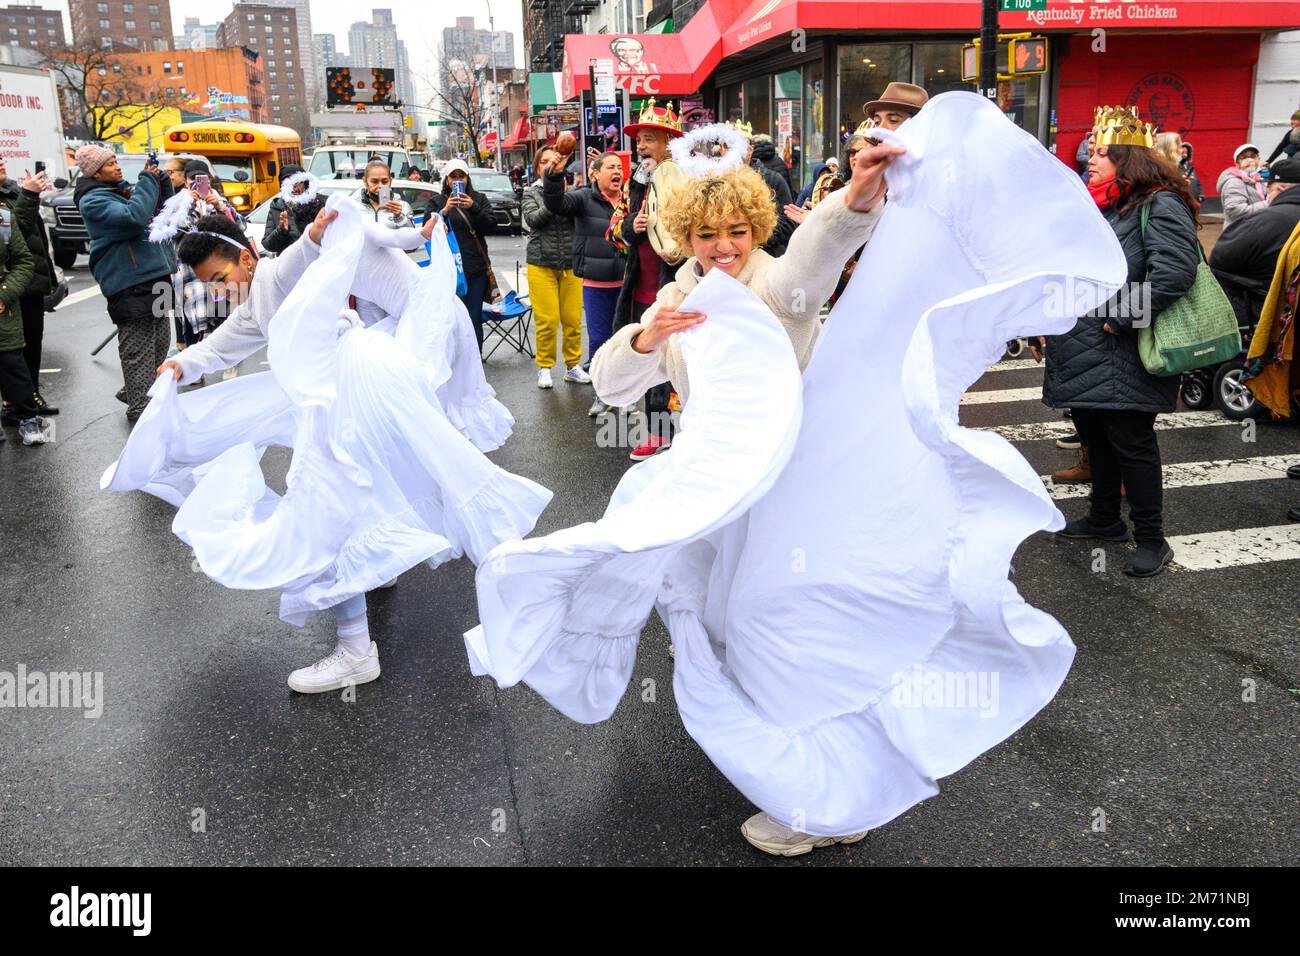 New York, USA. 6th Jan, 2023. Participants dressed up as angels perform in the streets of East Harlem during the 46th annual Three Kings Day Parade organized by El Museo del Barrio. The traditional Spanish celebration was held in person for the first time since the start of the coronavirus (COVID-19) pandemic. The theme for this year was: 'Entre Familia: Mental Health & Wellness of our Communities' focusing on the importance of mental health and wellness. Credit: Enrique Shore/Alamy Live News Stock Photo